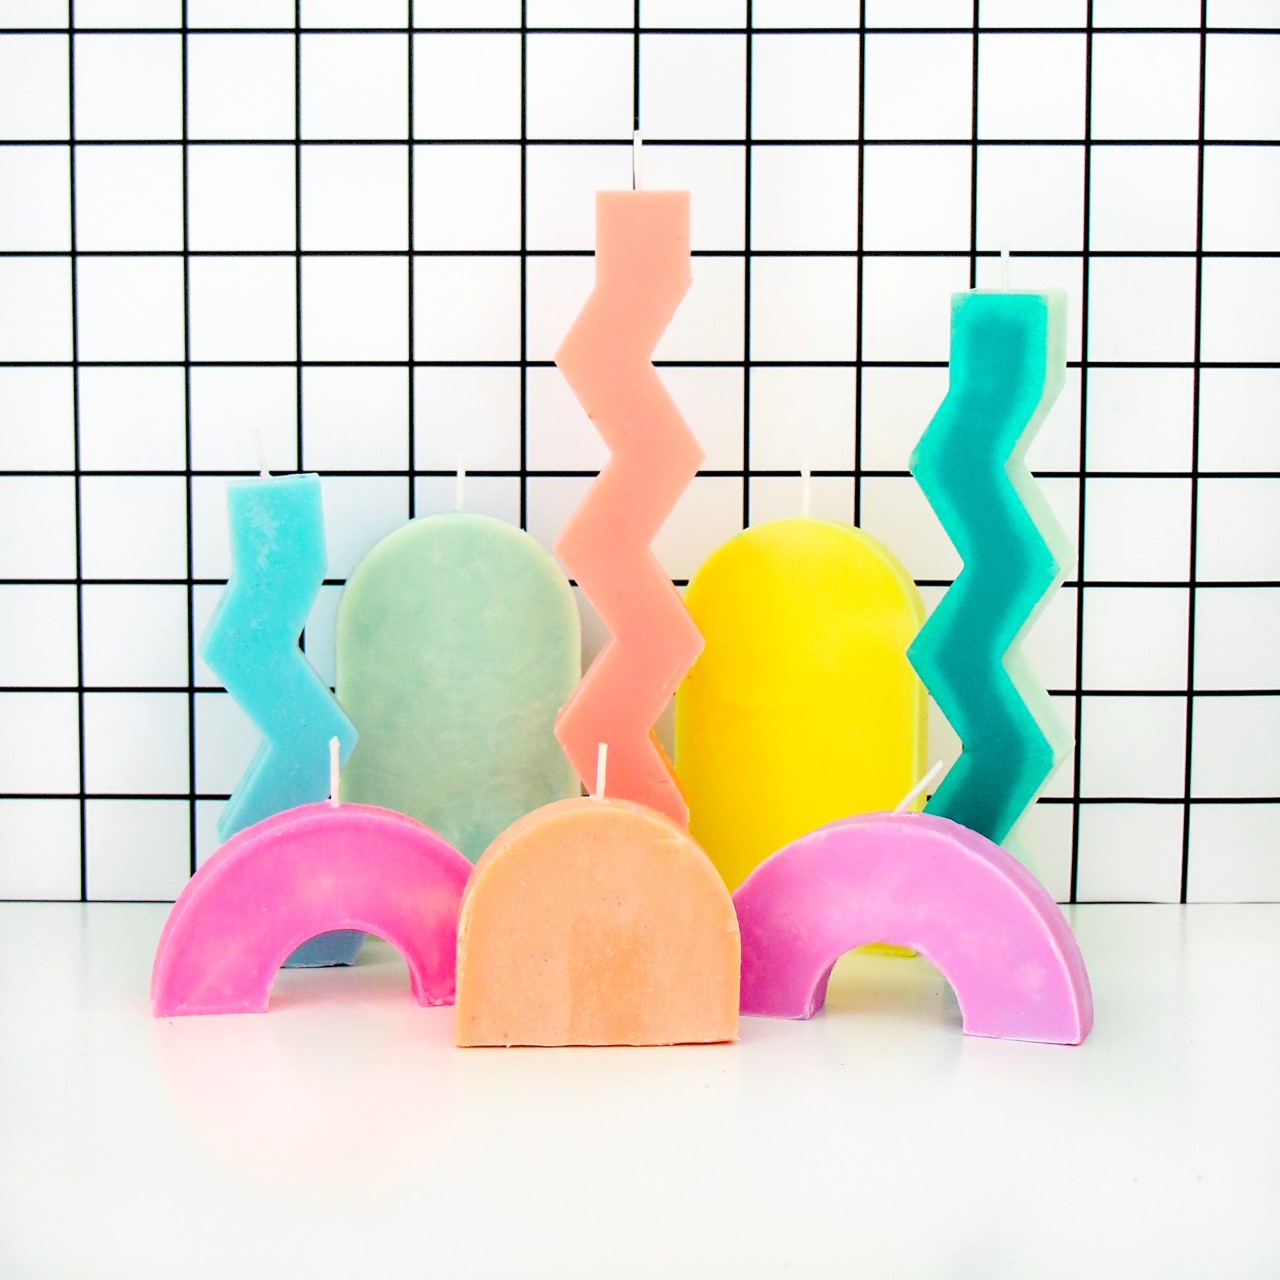 DIY Colorful Candles in Geometric Shapes